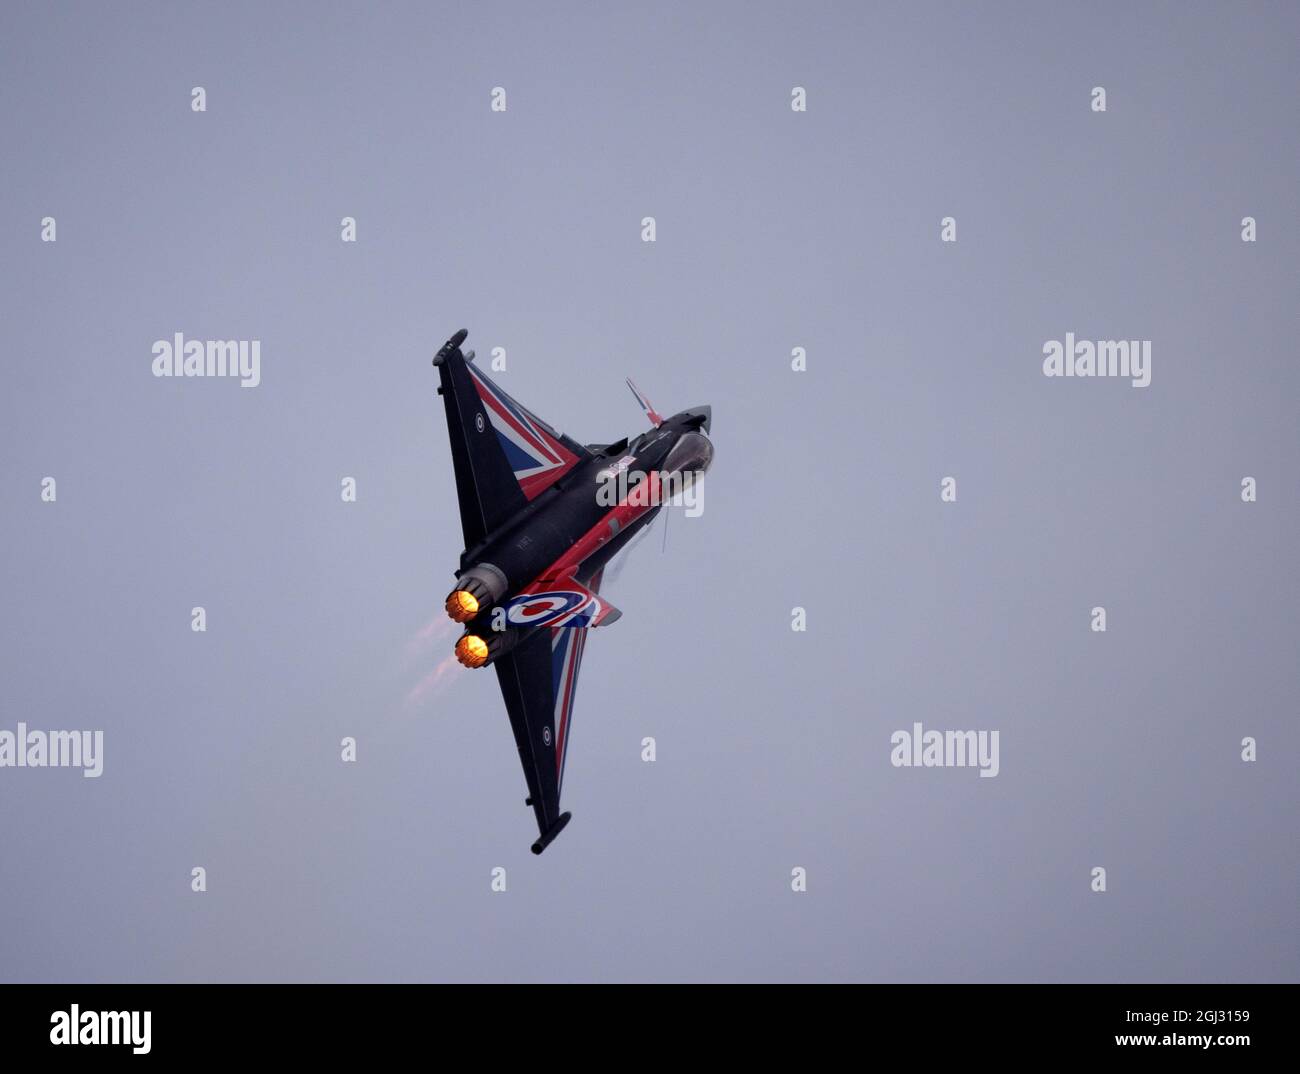 RAF BlackjackTyphoon fighther jet in flight, banked in a turn with afterburners on. Stock Photo